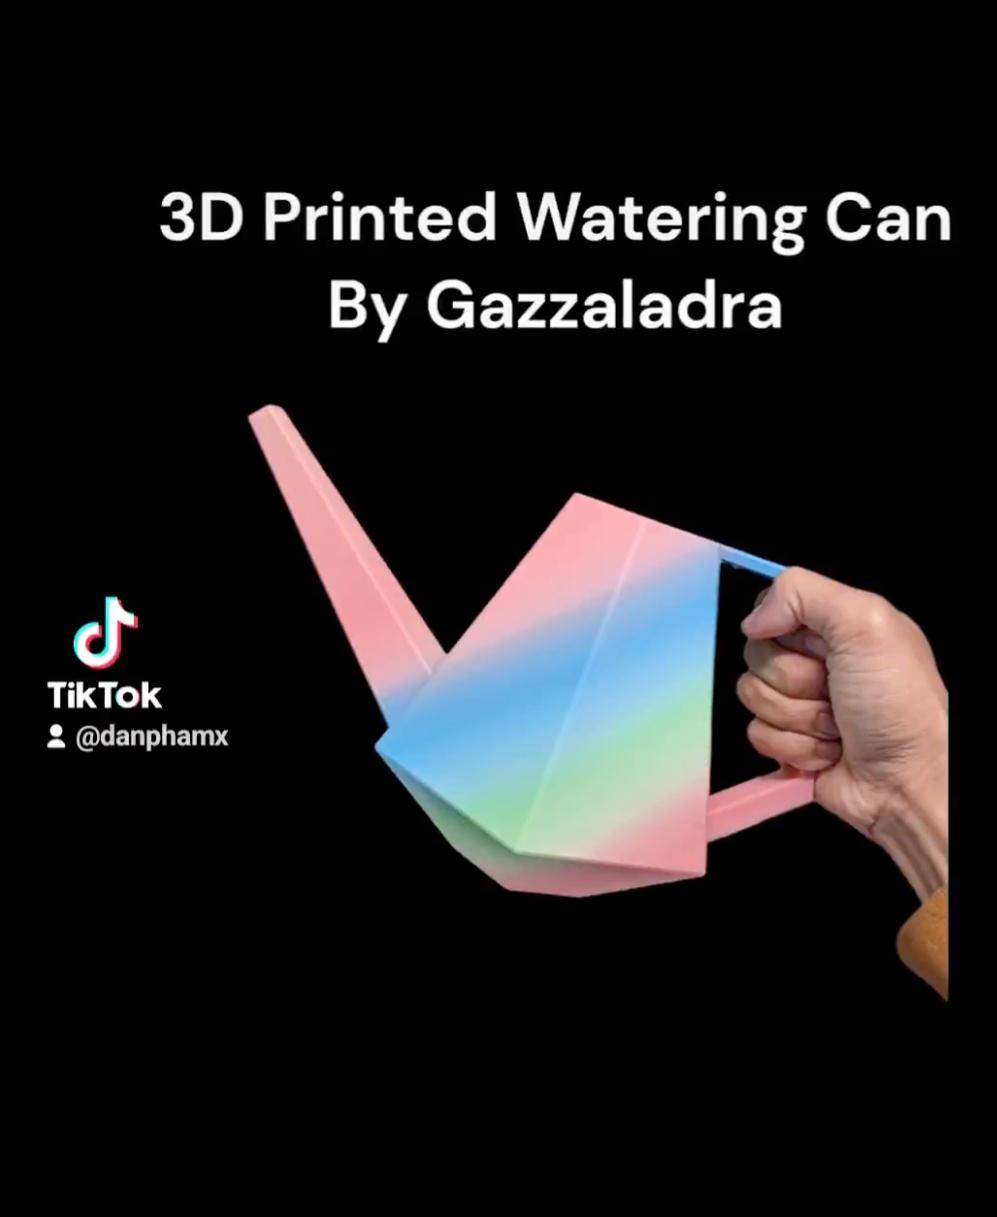 Watering can - It works great and looks amazing! One of my favorite prints to use everyday. - 3d model